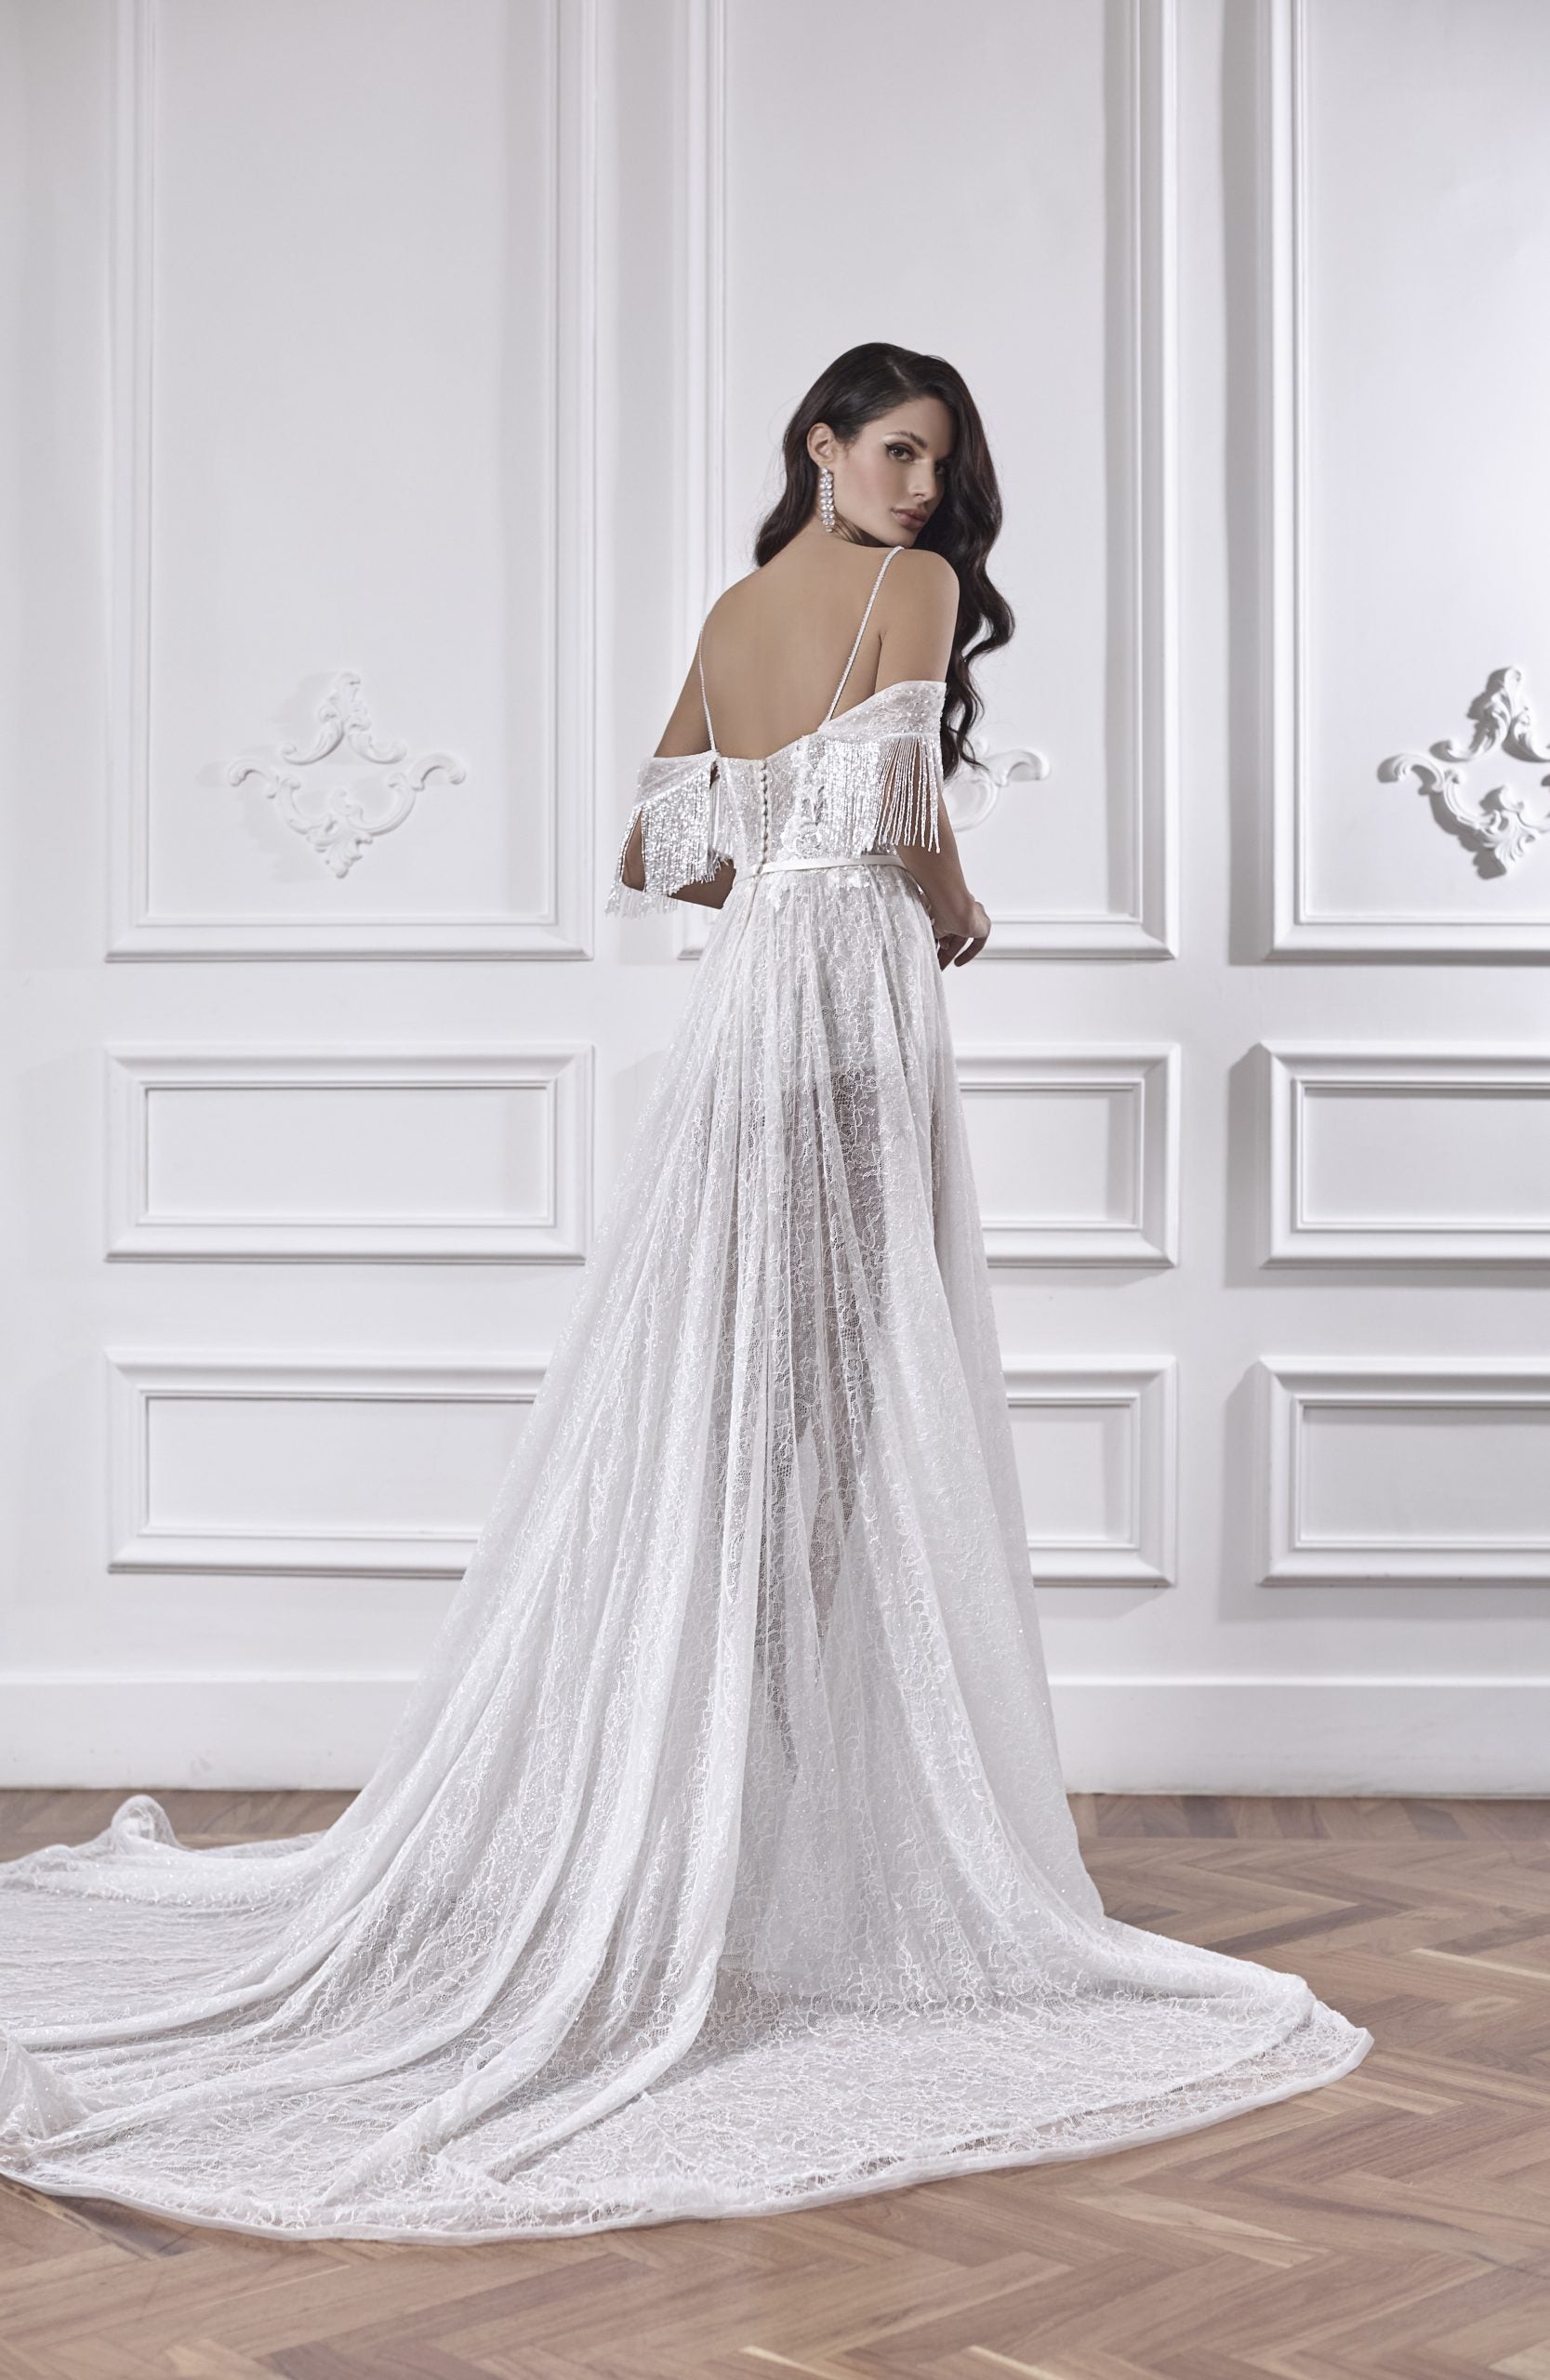 Lace A-line Wedding Dress With Deep V-neckline And High Slit by Maison Signore - Image 2